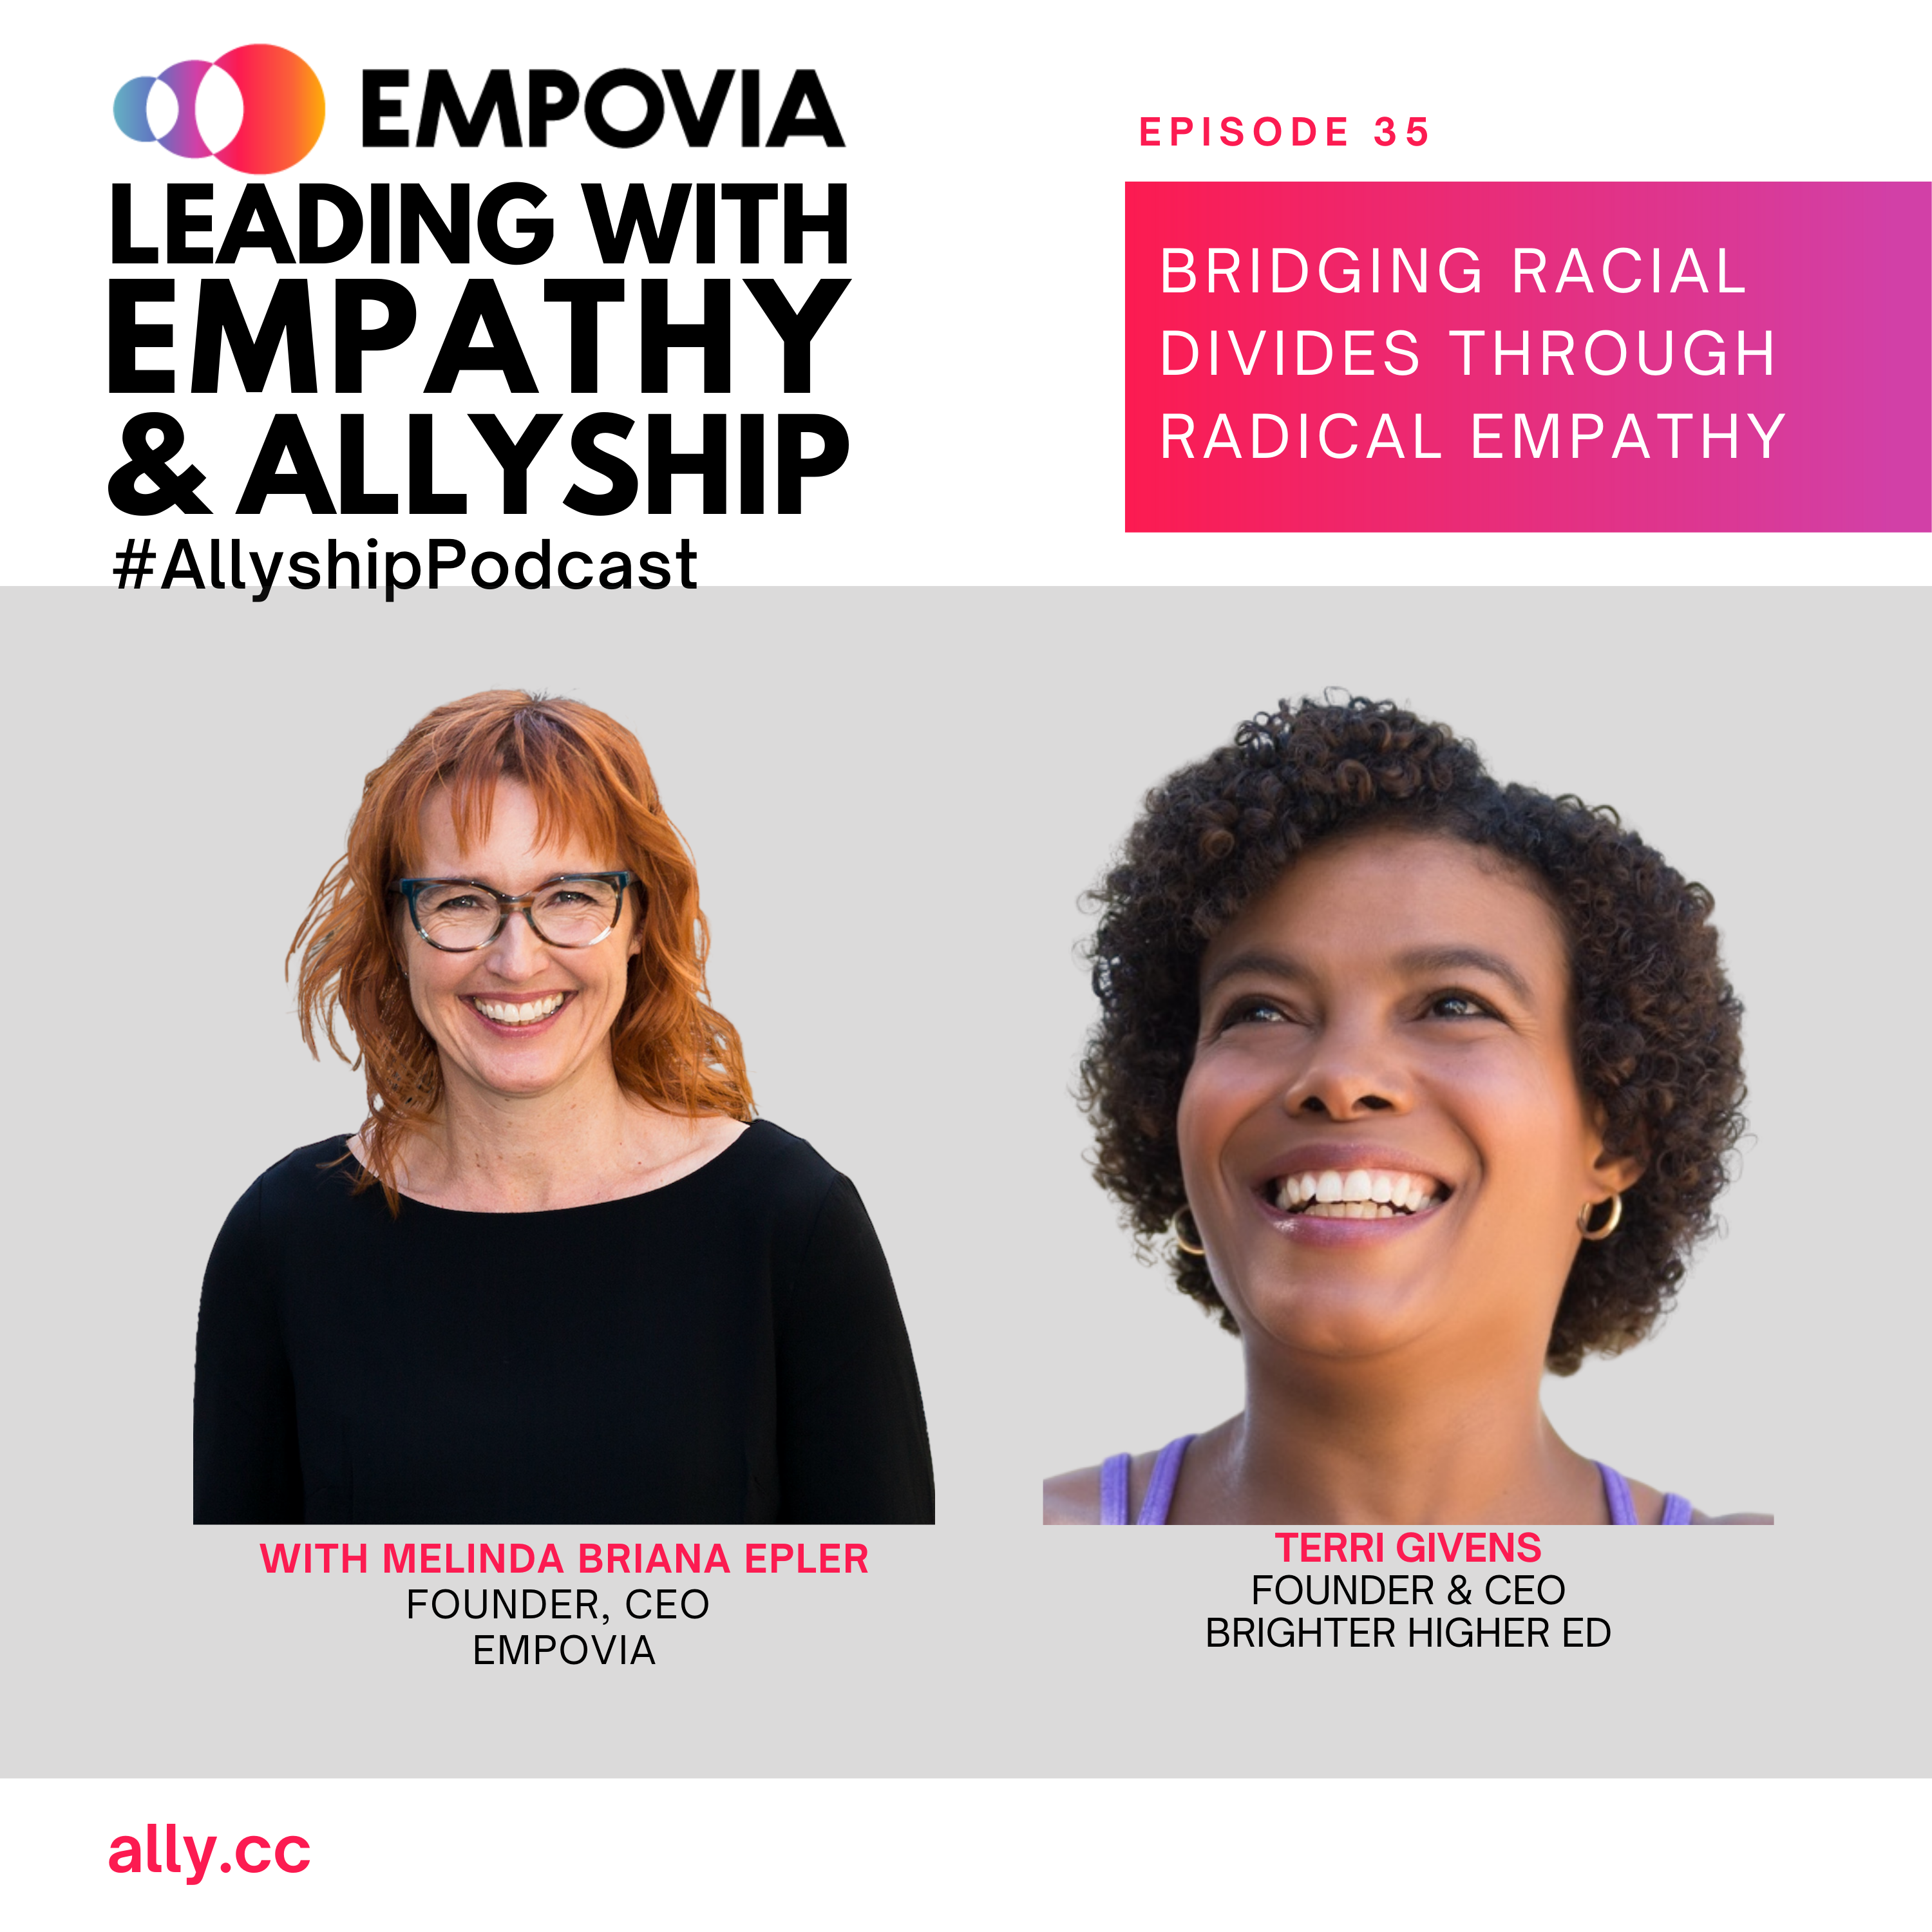 Leading With Empathy & Allyship promo with the Empovia logo and photos of host Melinda Briana Epler, a White woman with red hair and glasses, and Terri Givens, a Black woman with short curly hair and purple top.